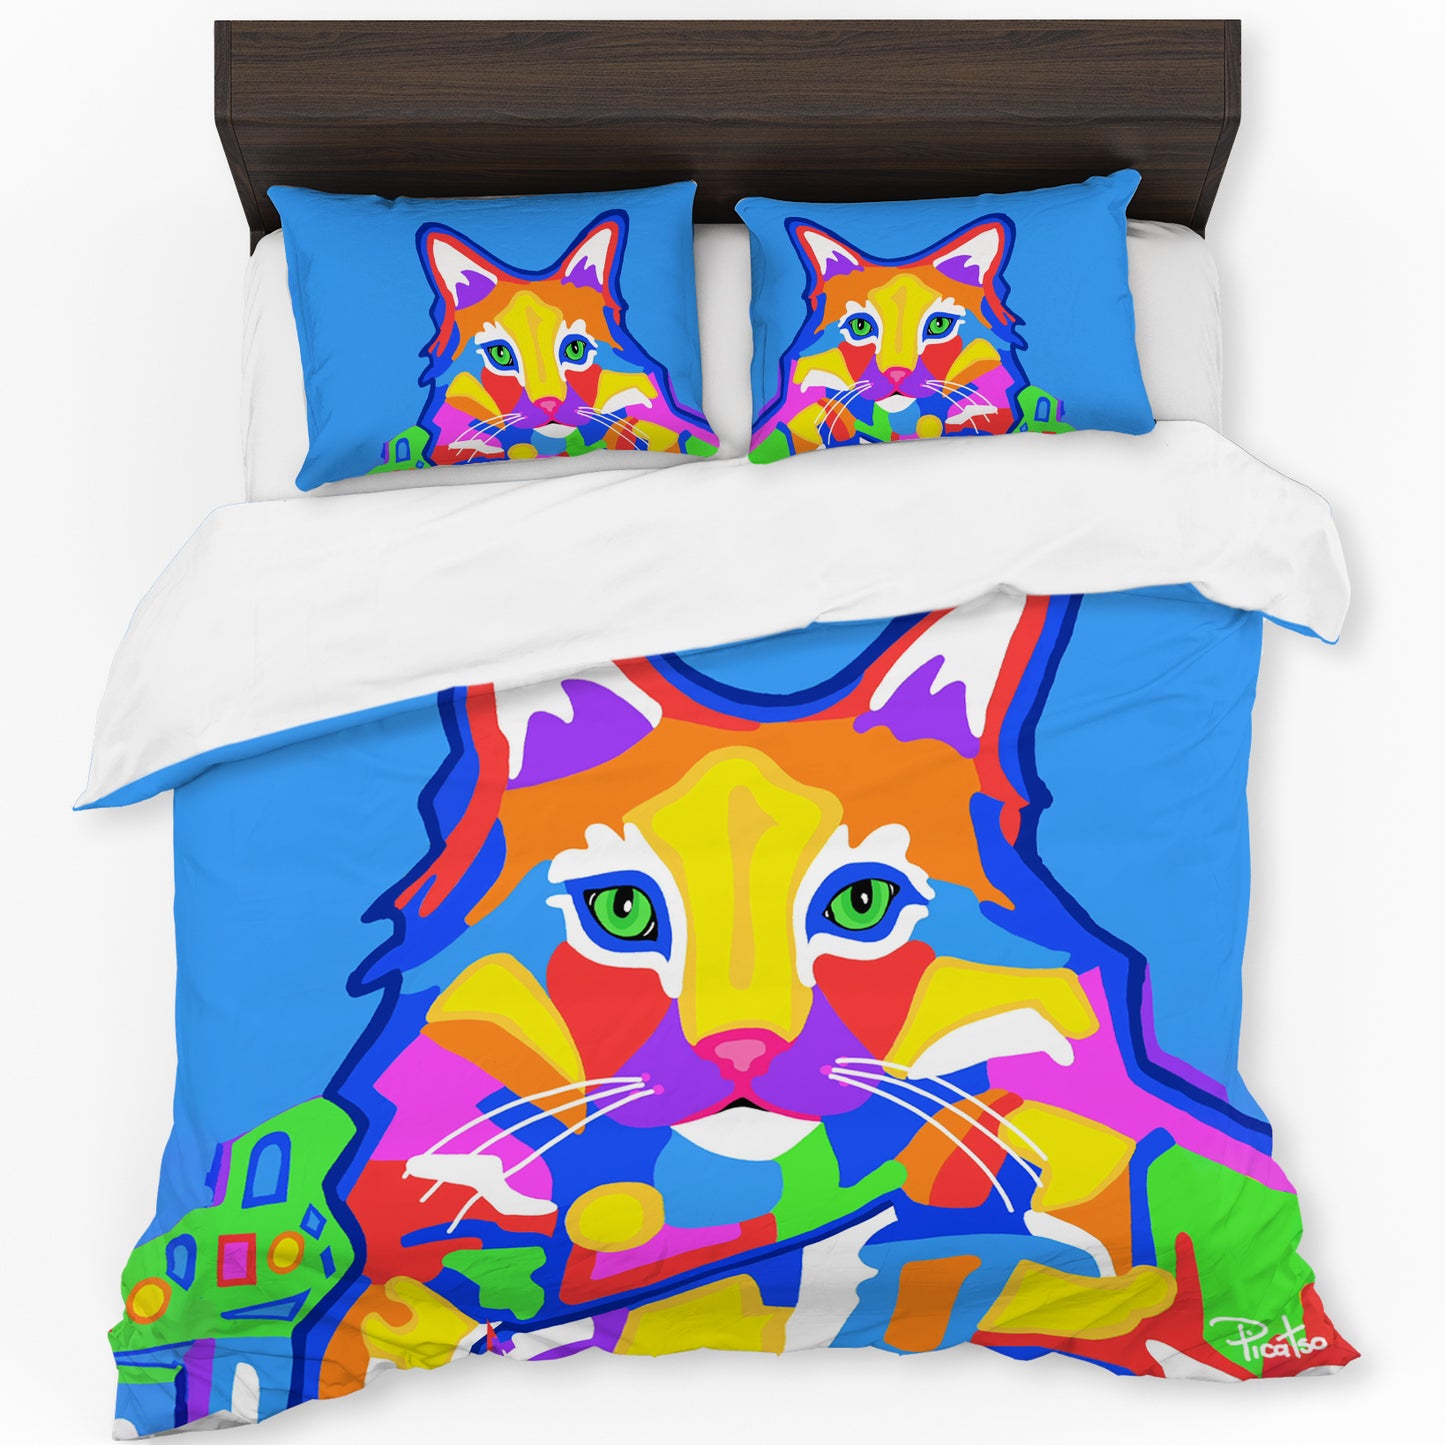 Kitty By Picatso Duvet Cover Set